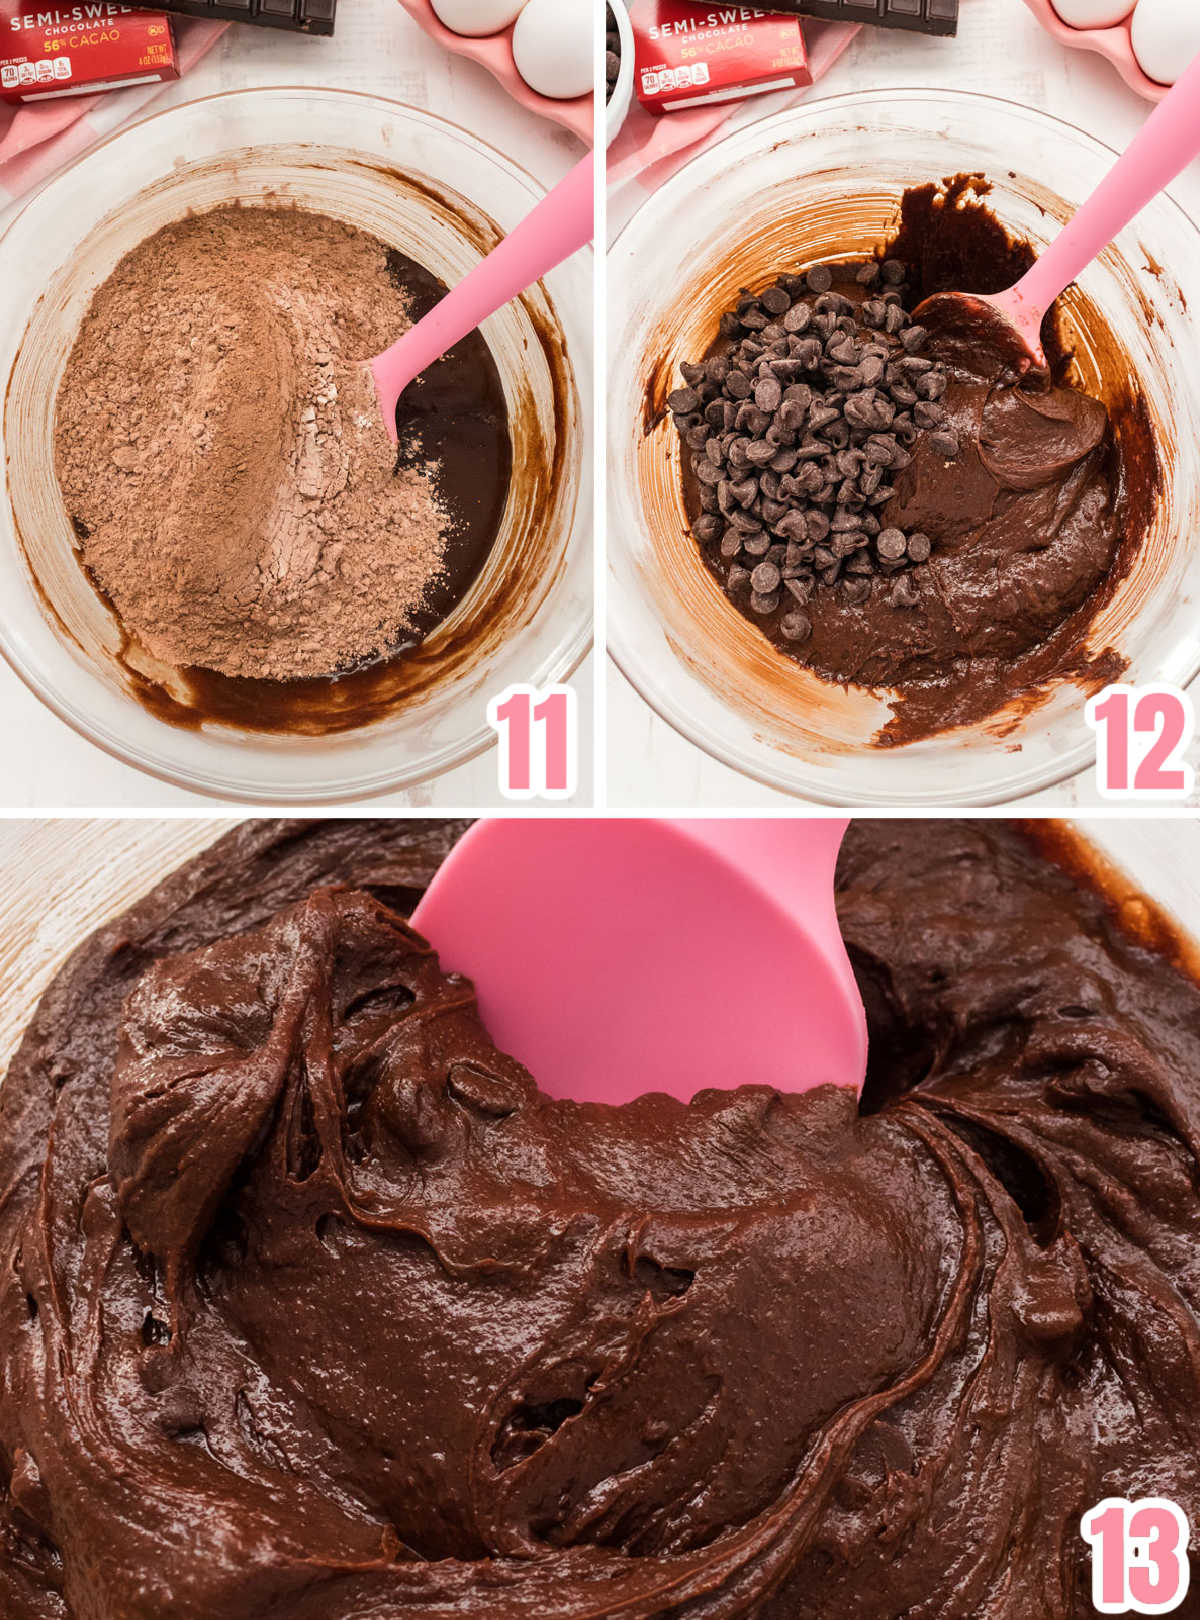 Collage image showing the final steps for making the homemade brownie batter.